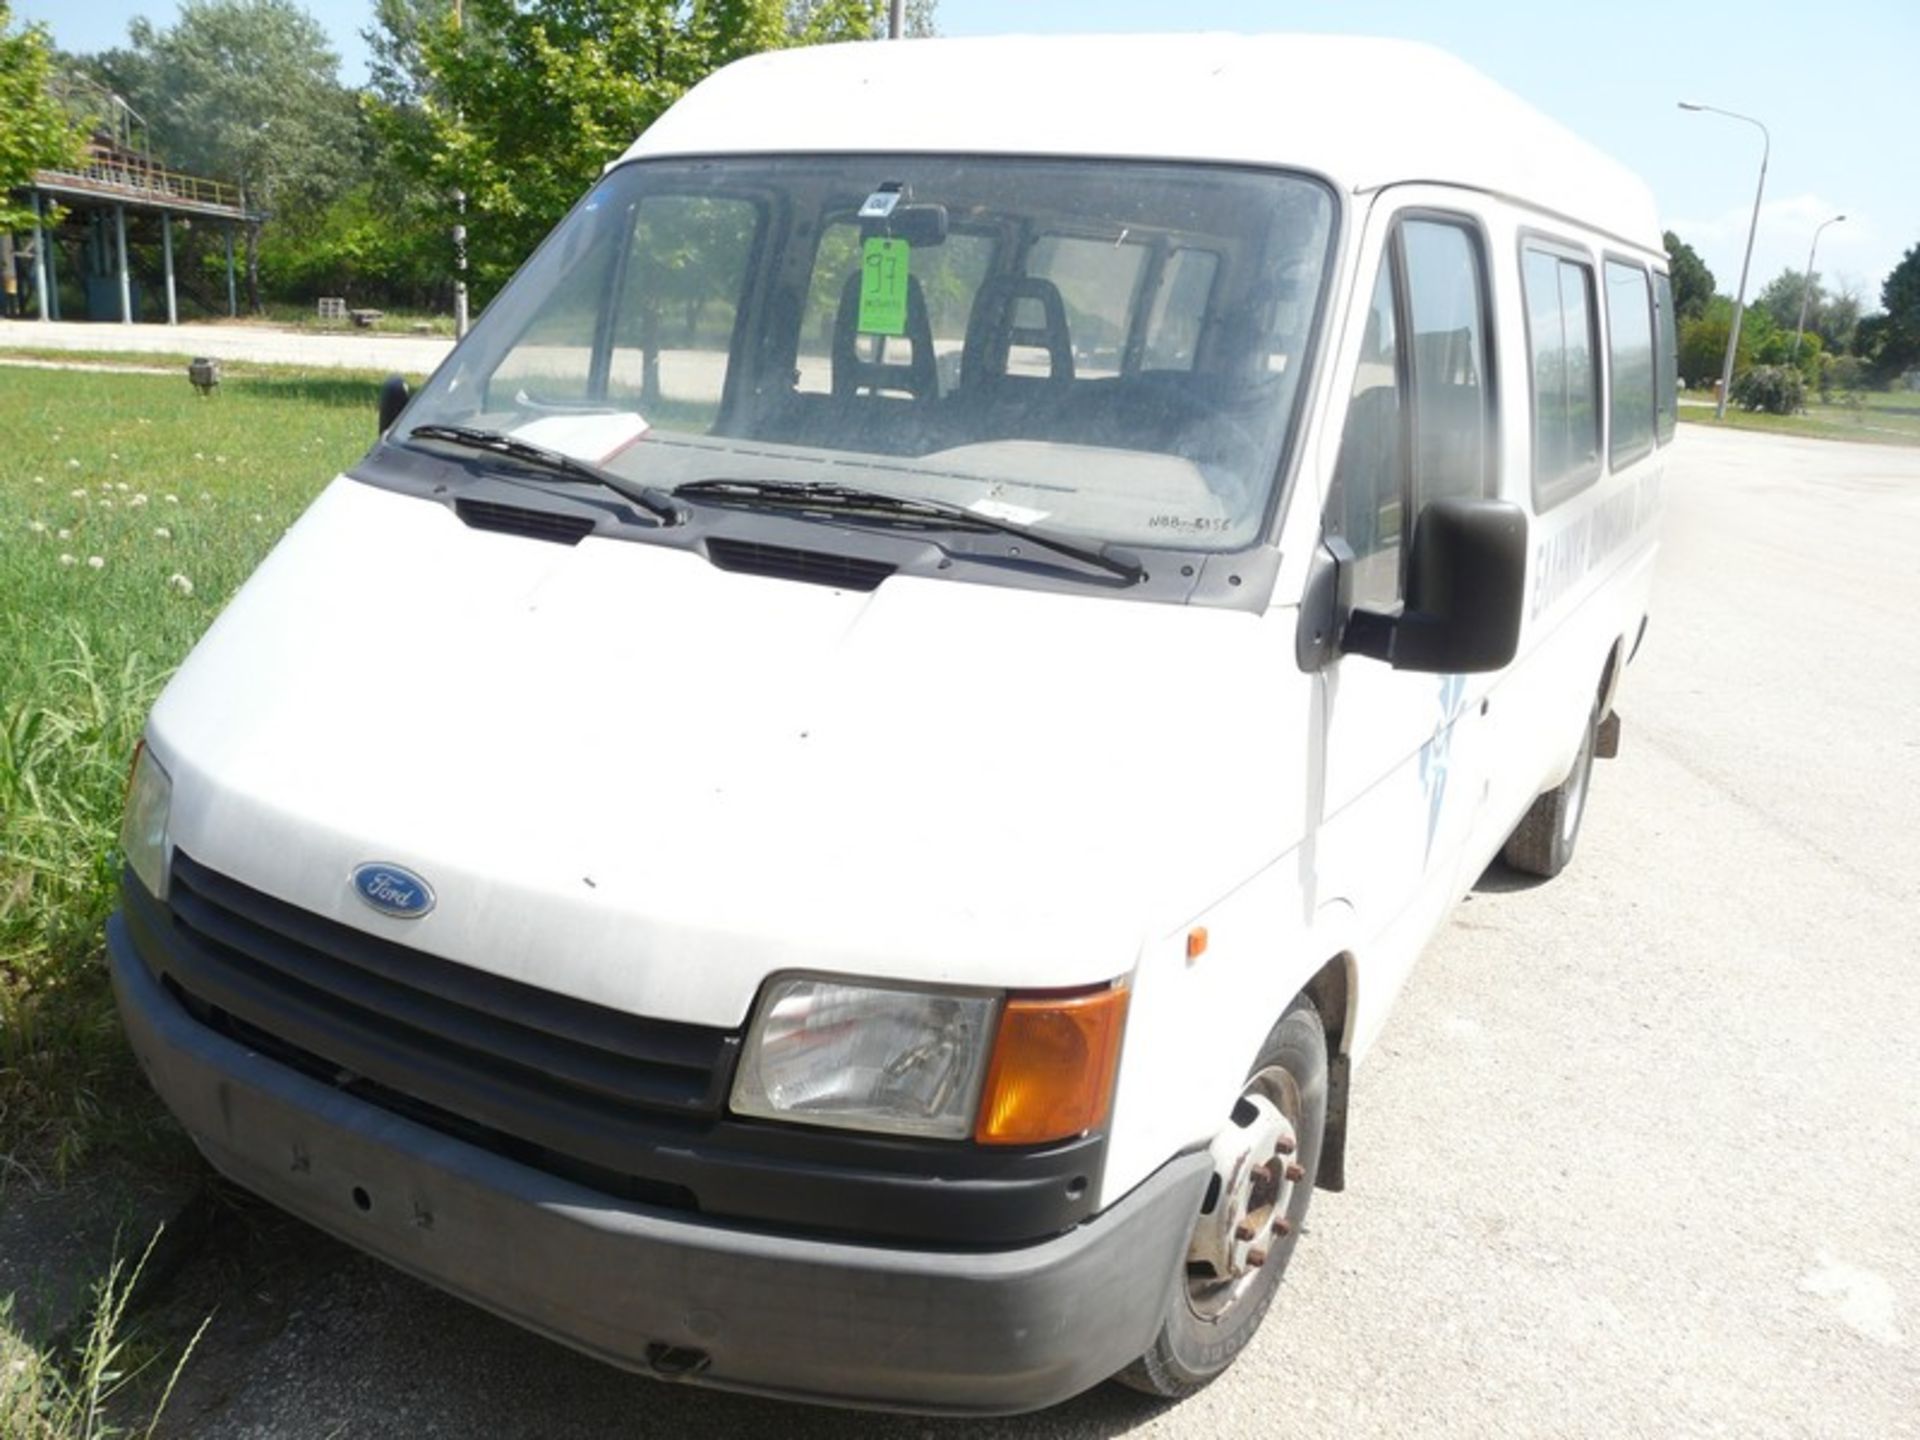 FORD TRANSIT ,BUSS ,REG NBB 8158,KM : 108611, SEAT 14, DIESEL , Y.O.M 1991 (Located in Greece - - Image 3 of 12